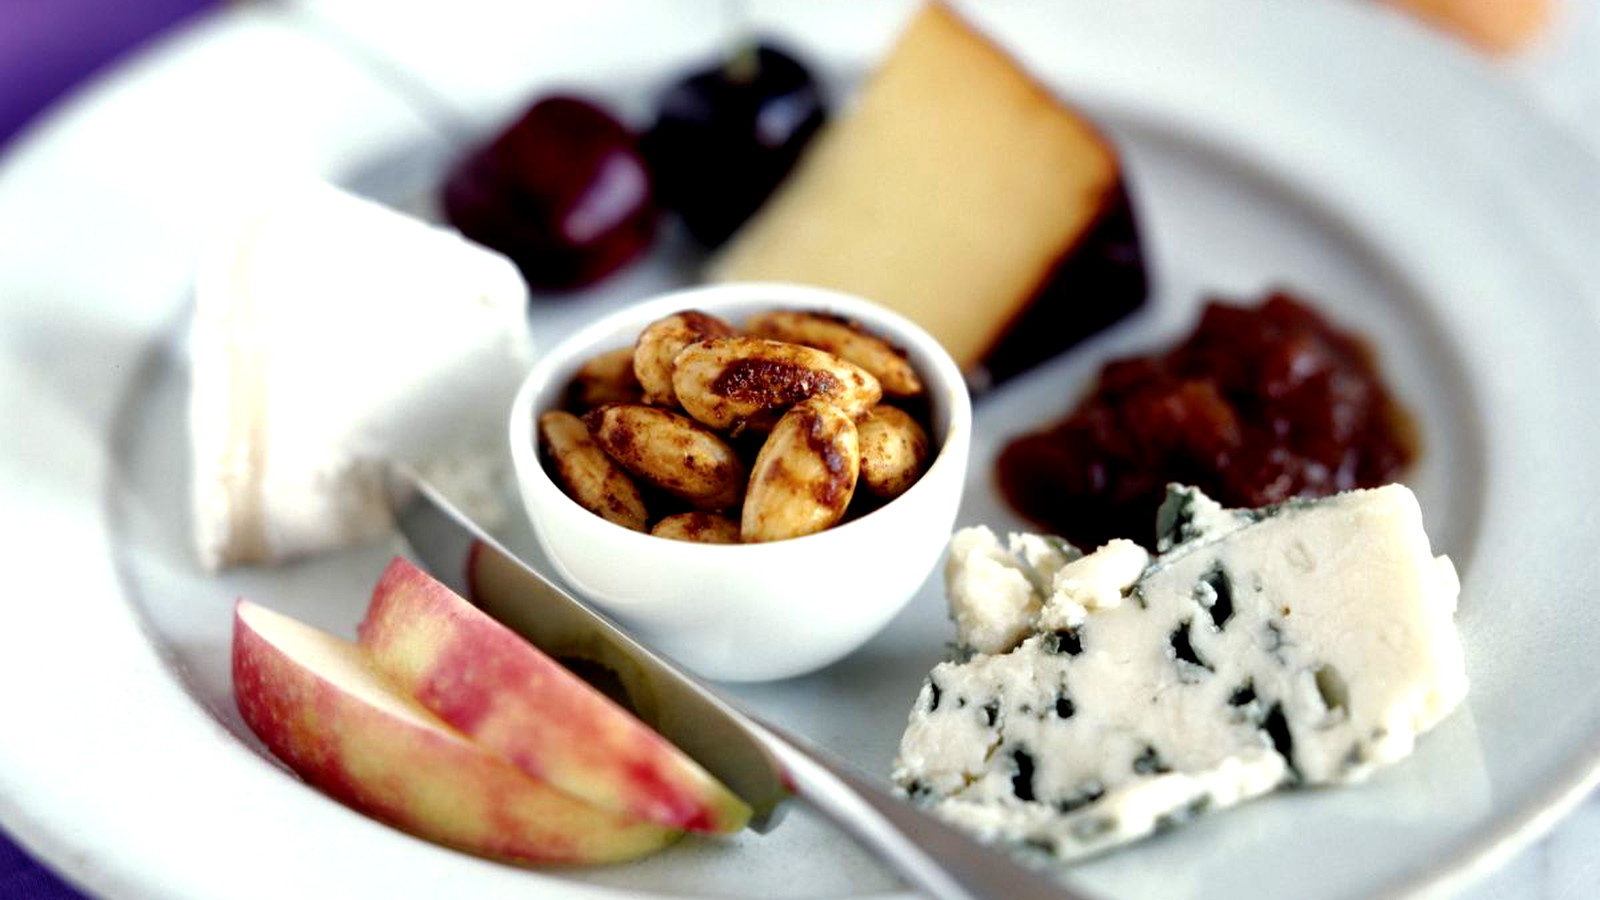 Image of Almond Cheese Plate